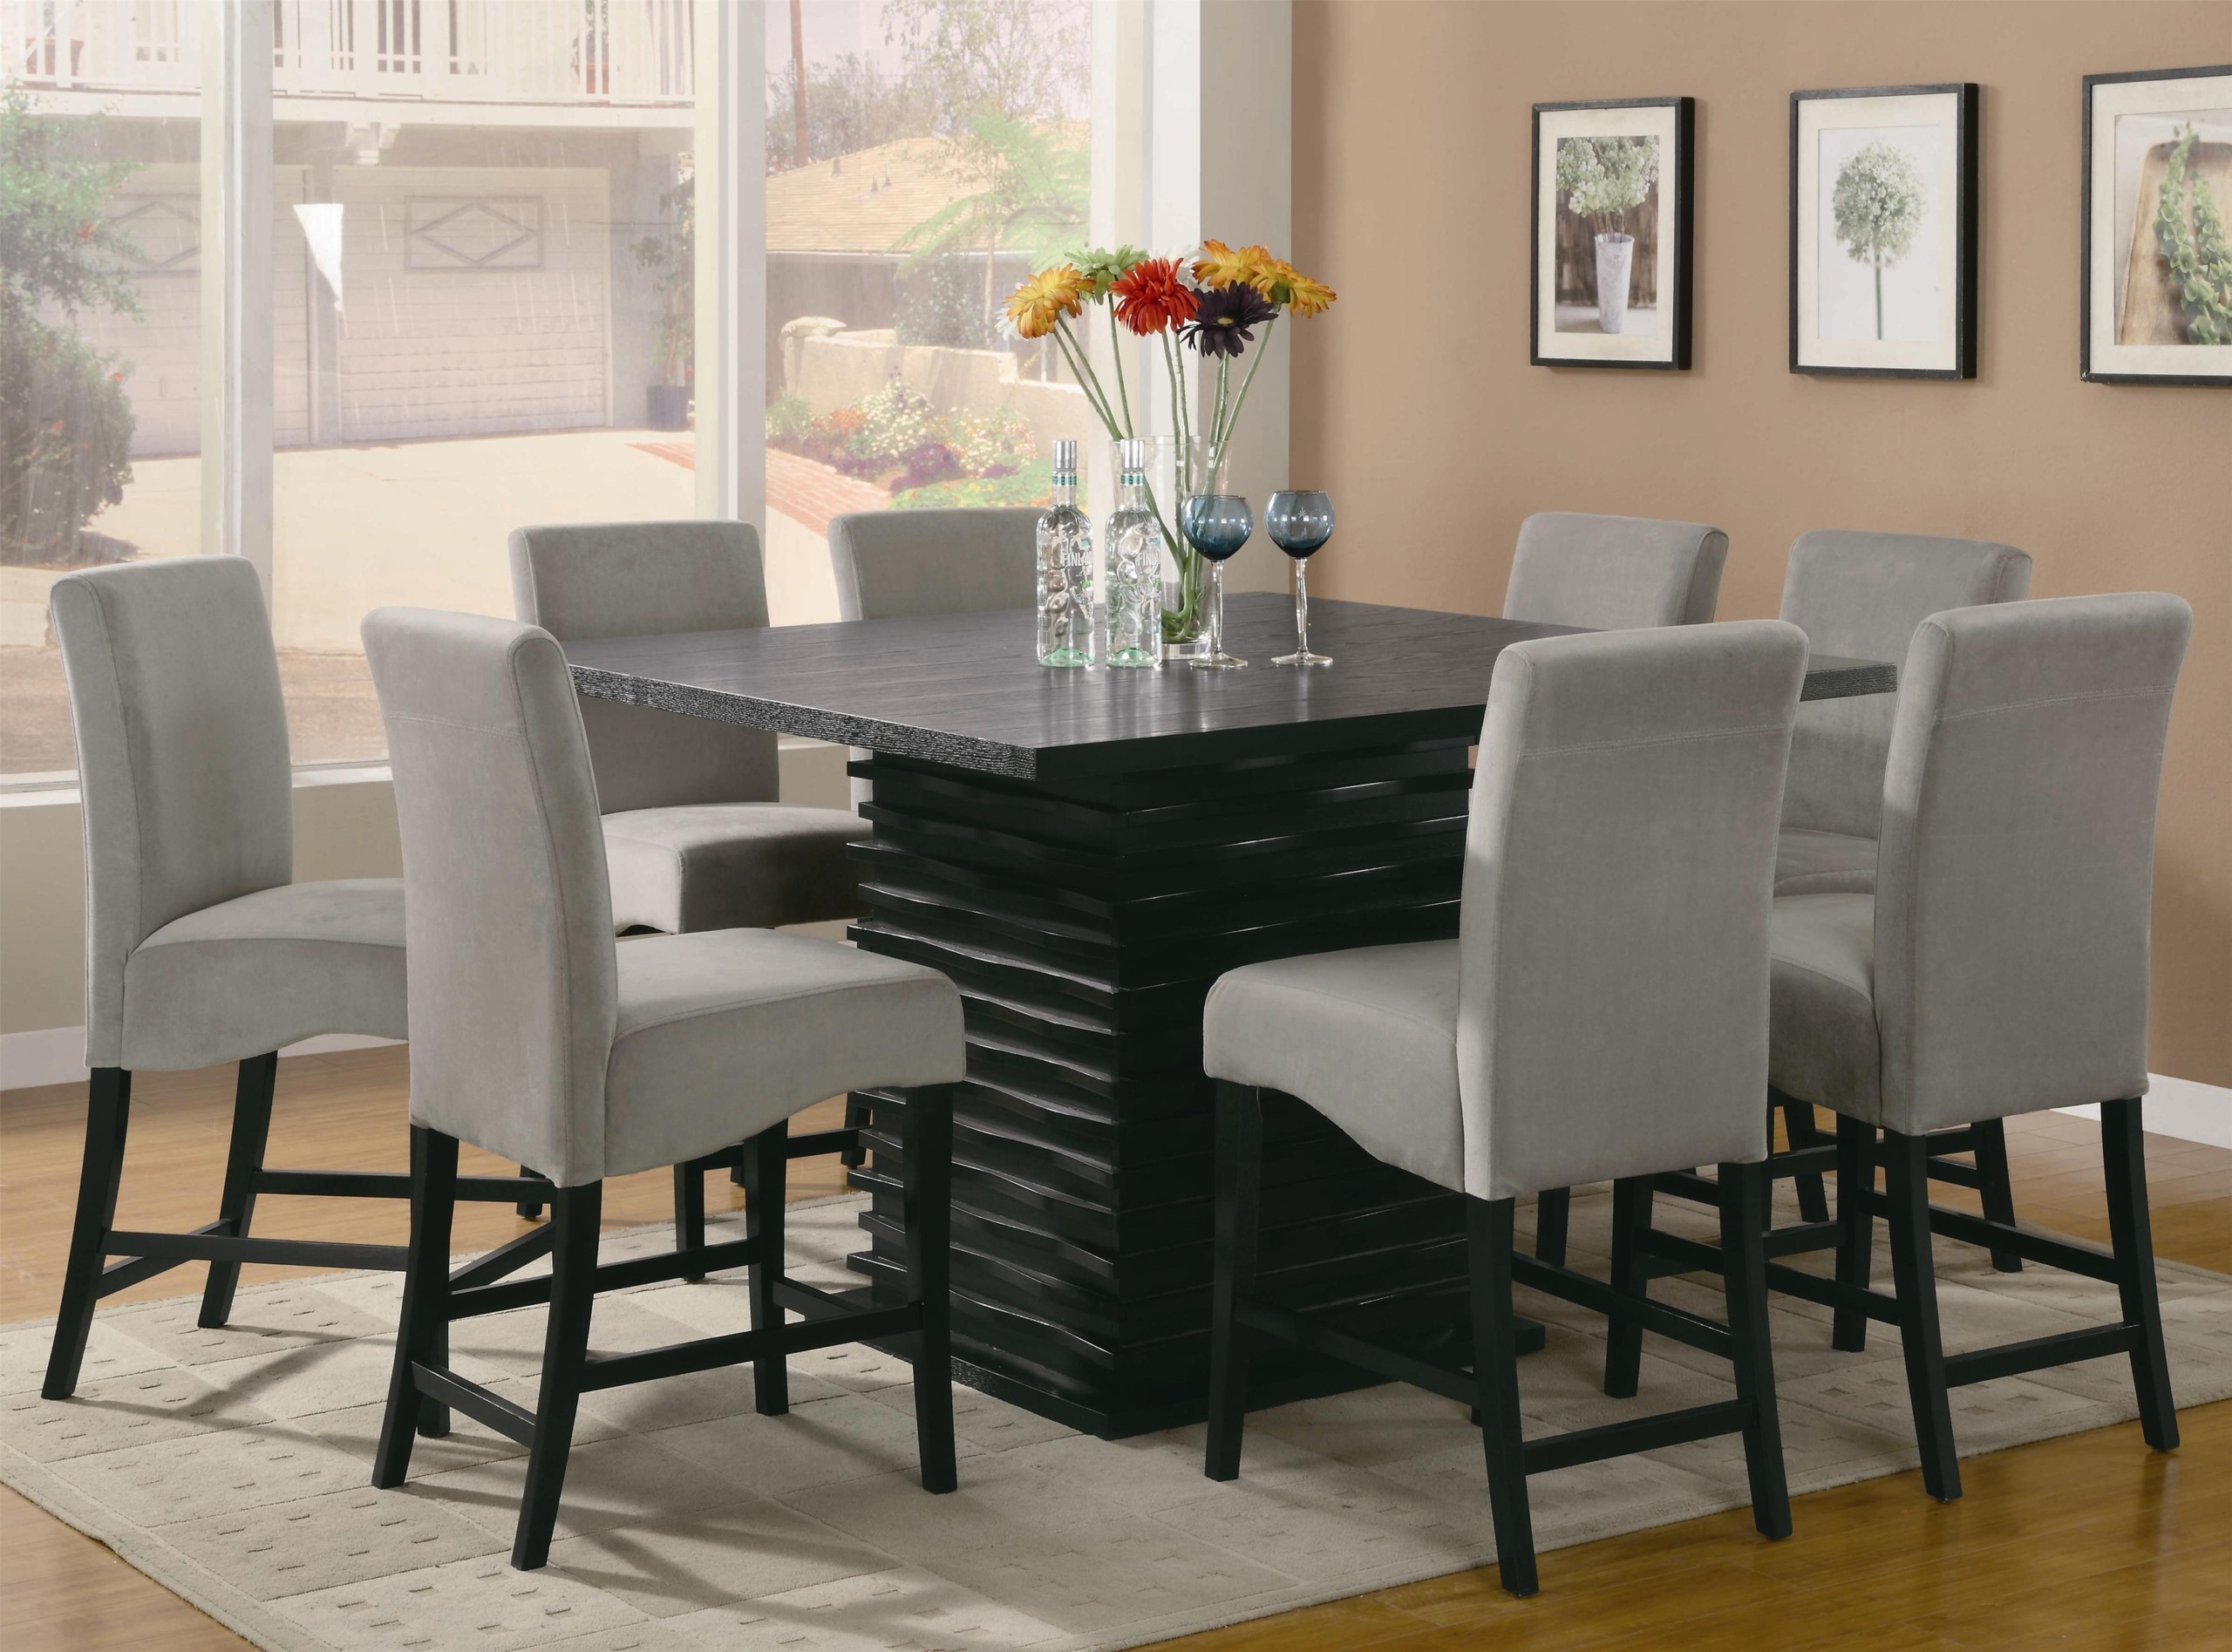 Dining room set 13 concept of black and white dining